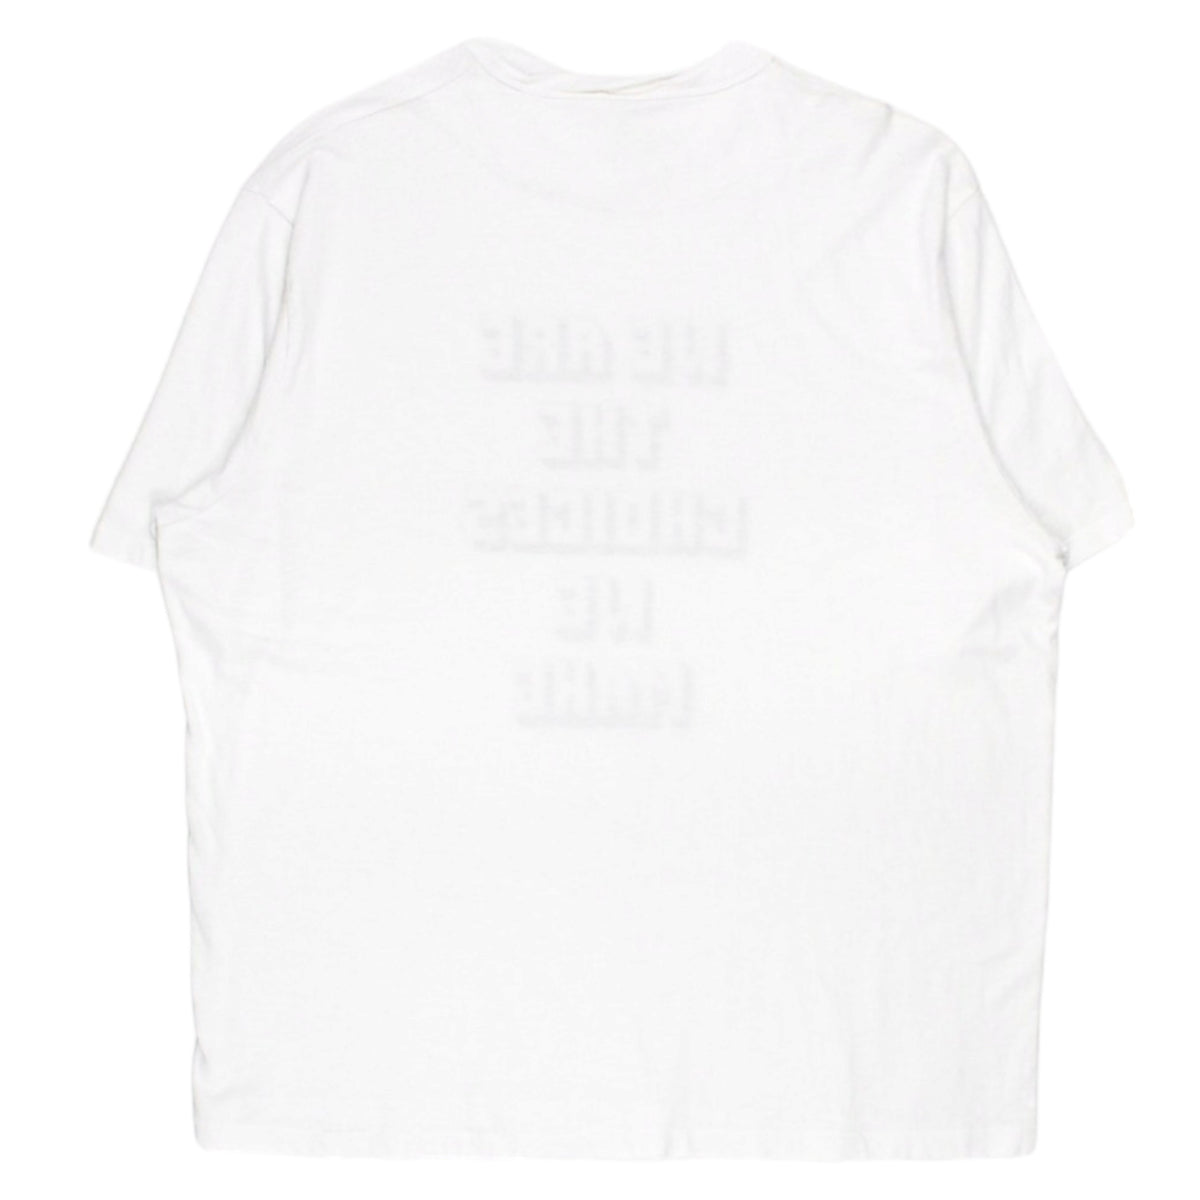 Garbstore White "We Are The Choices We Make" Tee